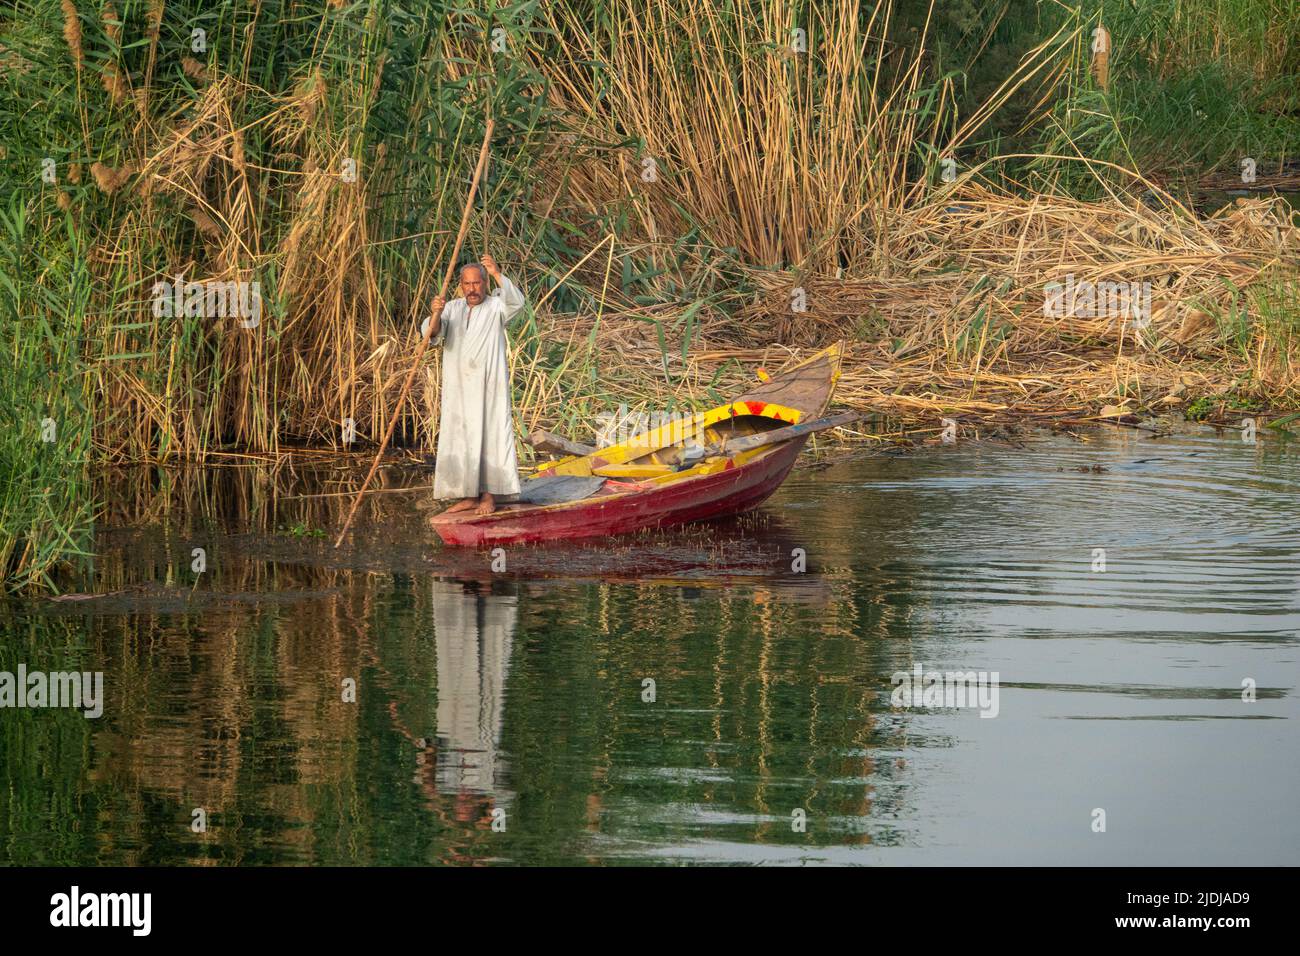 A lone Nile fisherman holding long stick standing in brightly painted wooden fishing boat in a small creek with gently rippling water and reflections Stock Photo